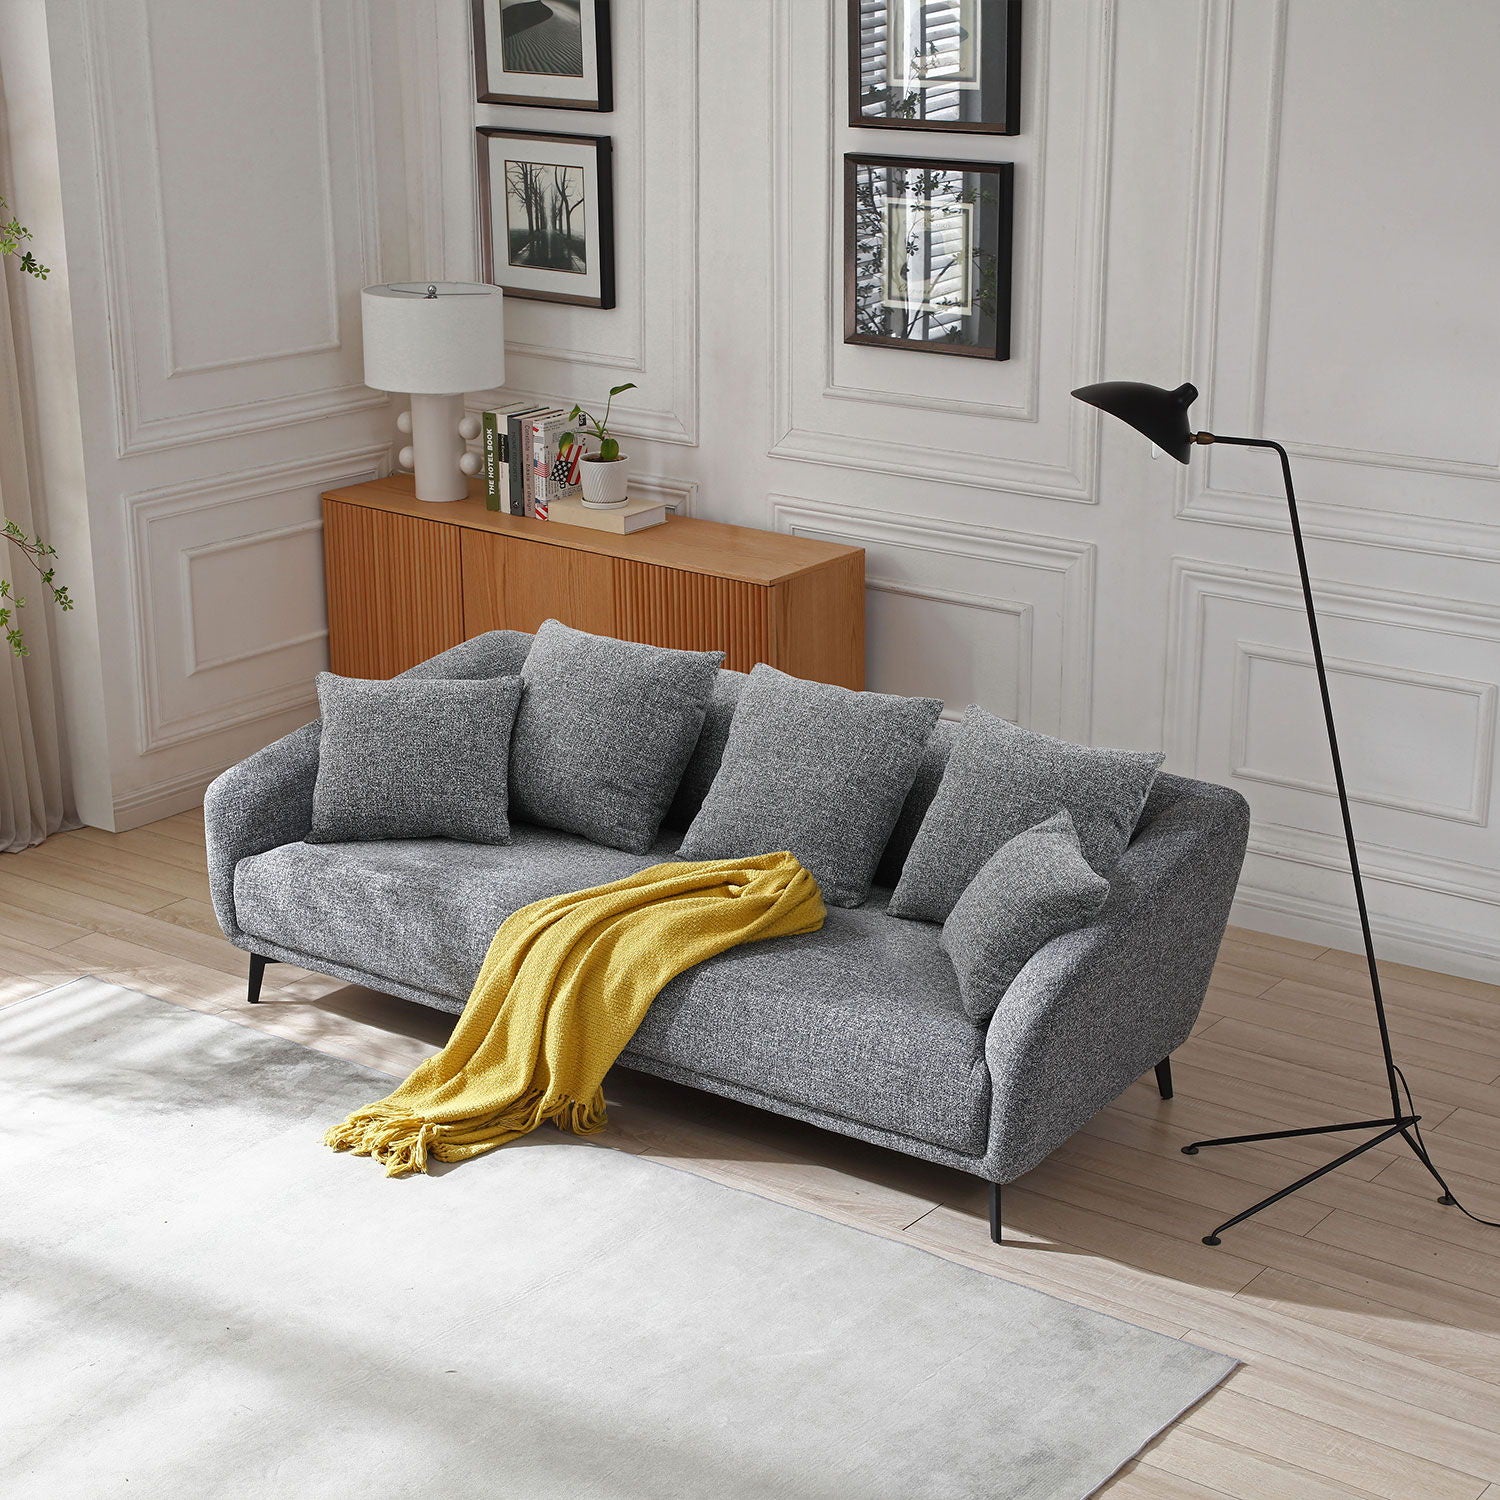 3 Seater Sofa Couch, Modern Fabric Upholstered Sofa With Three Cushions, 2 Pillows - Dark Gray